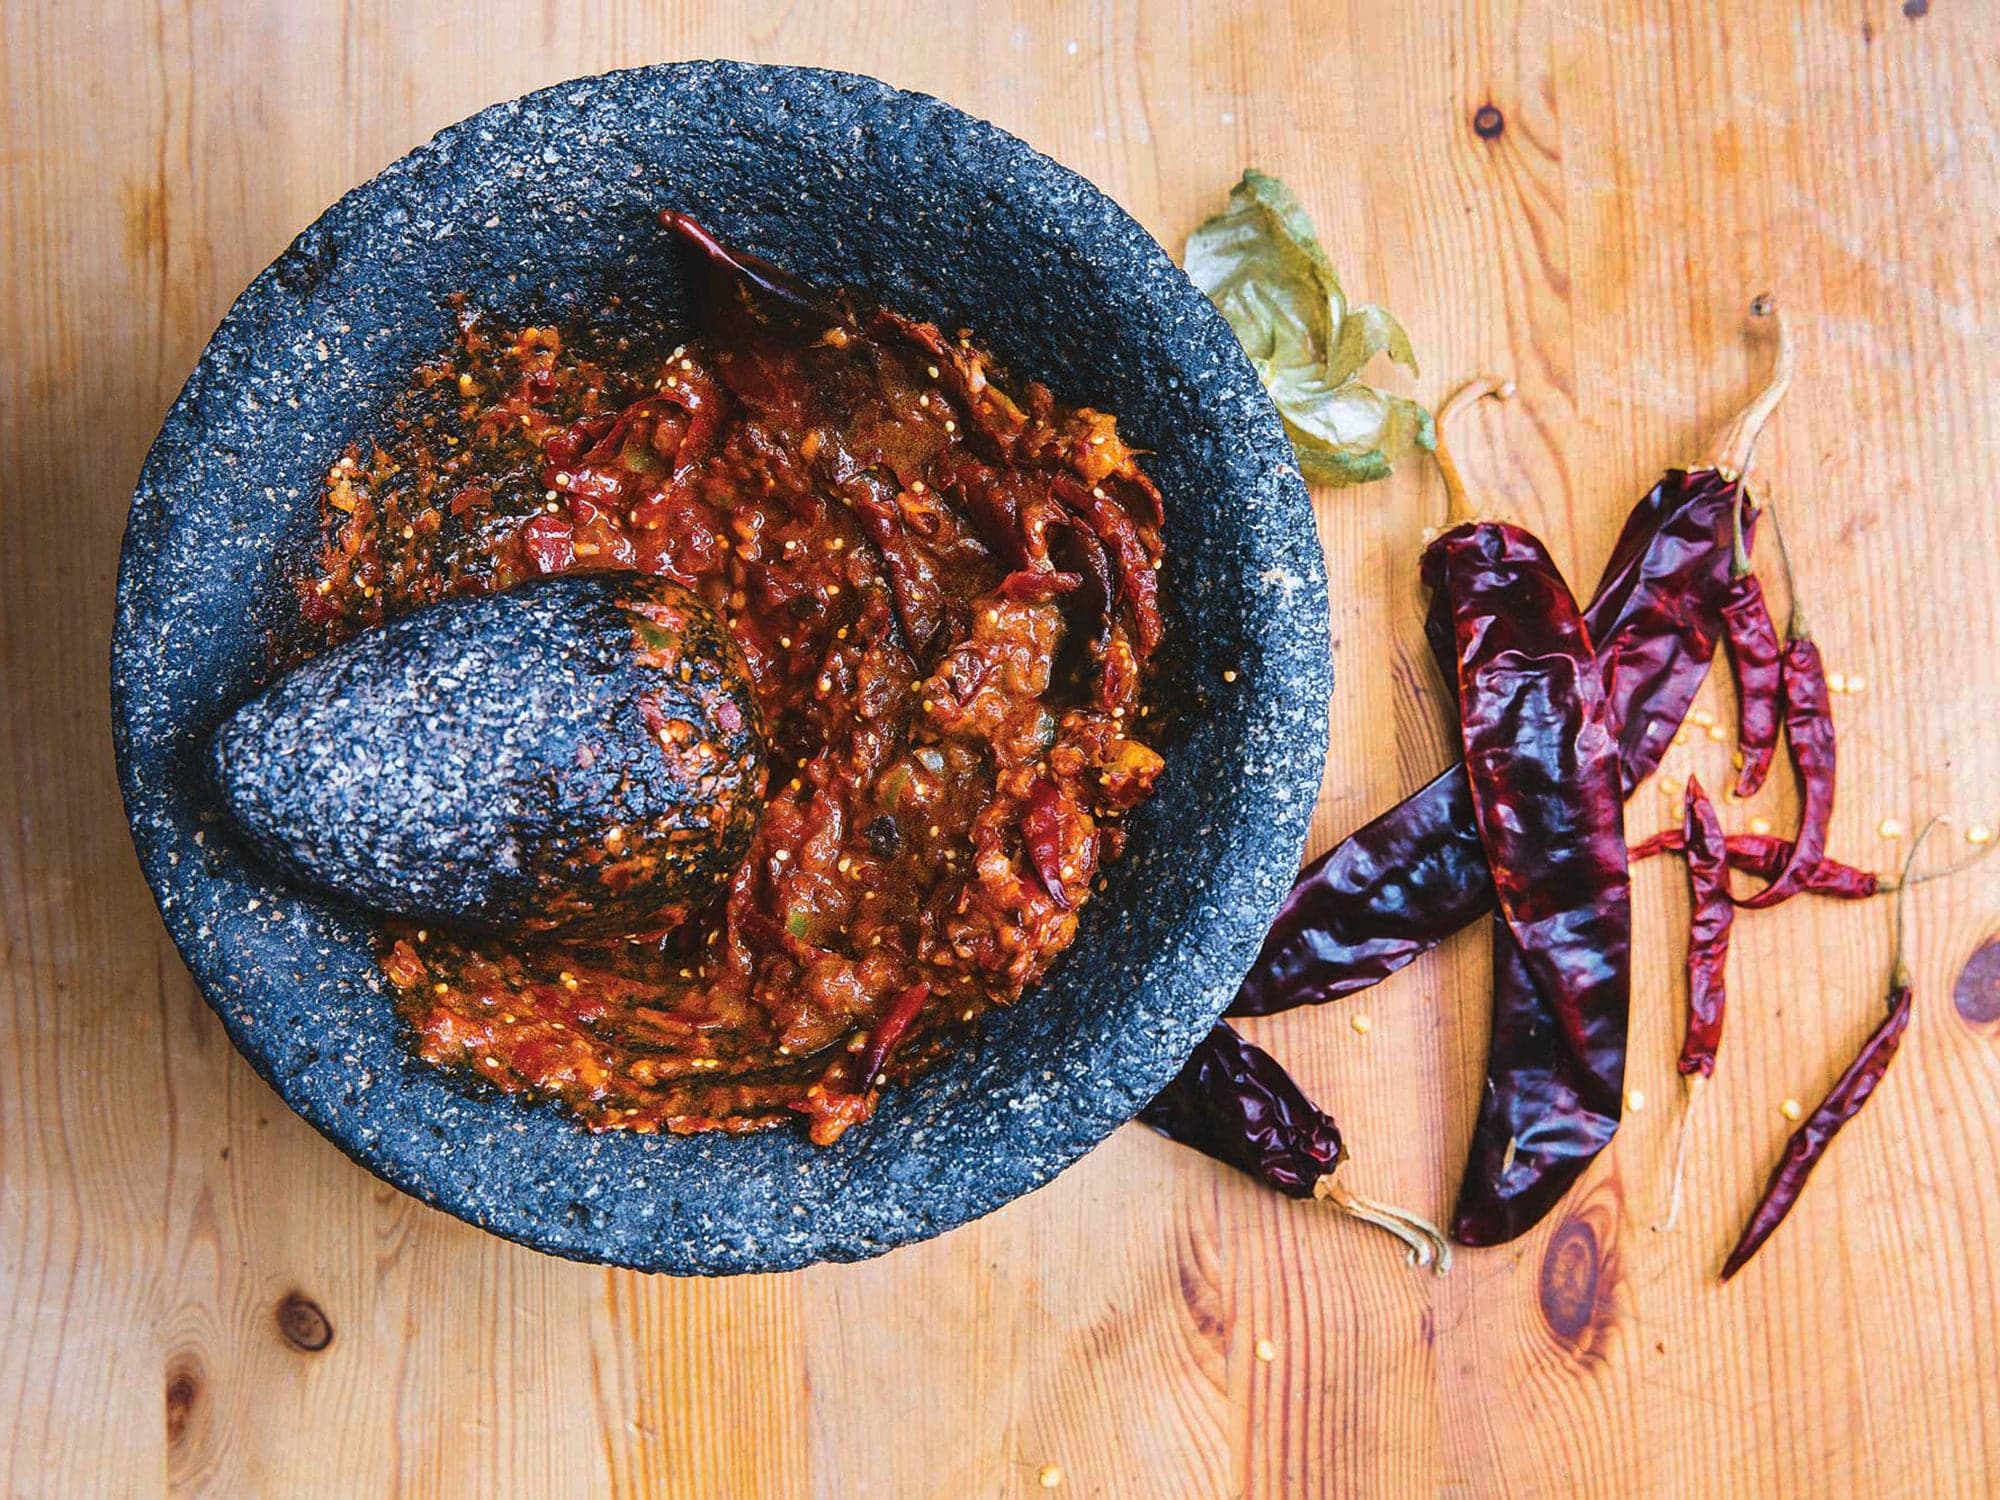 homemade salsa in a mortar and pestle